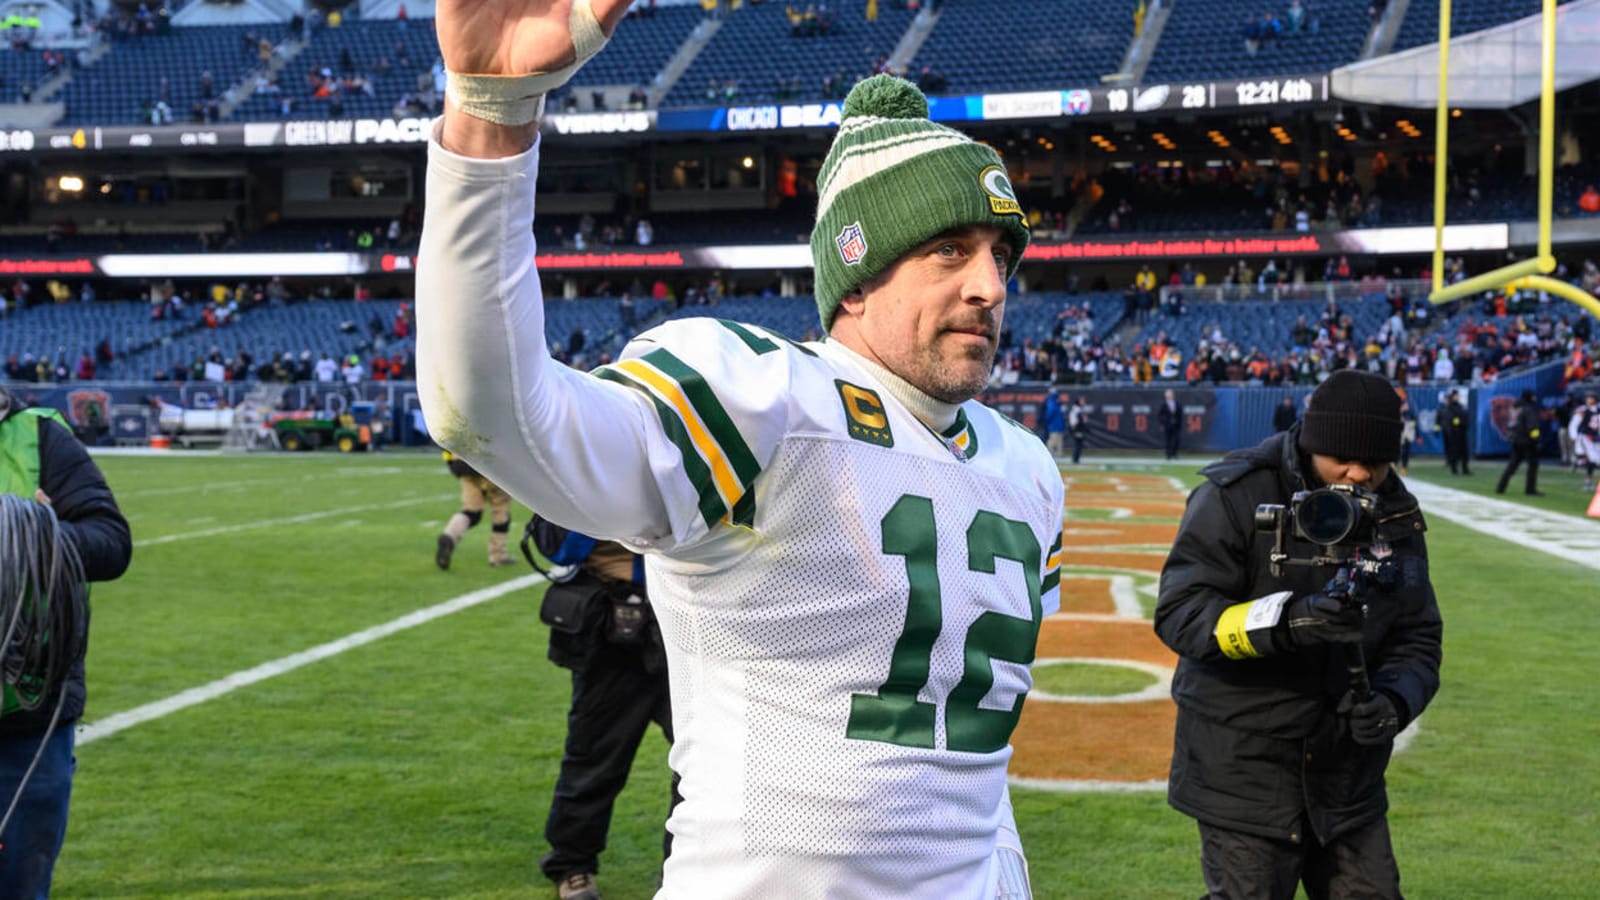 Rodgers hasn't yet started 'darkness retreat' amid rumors